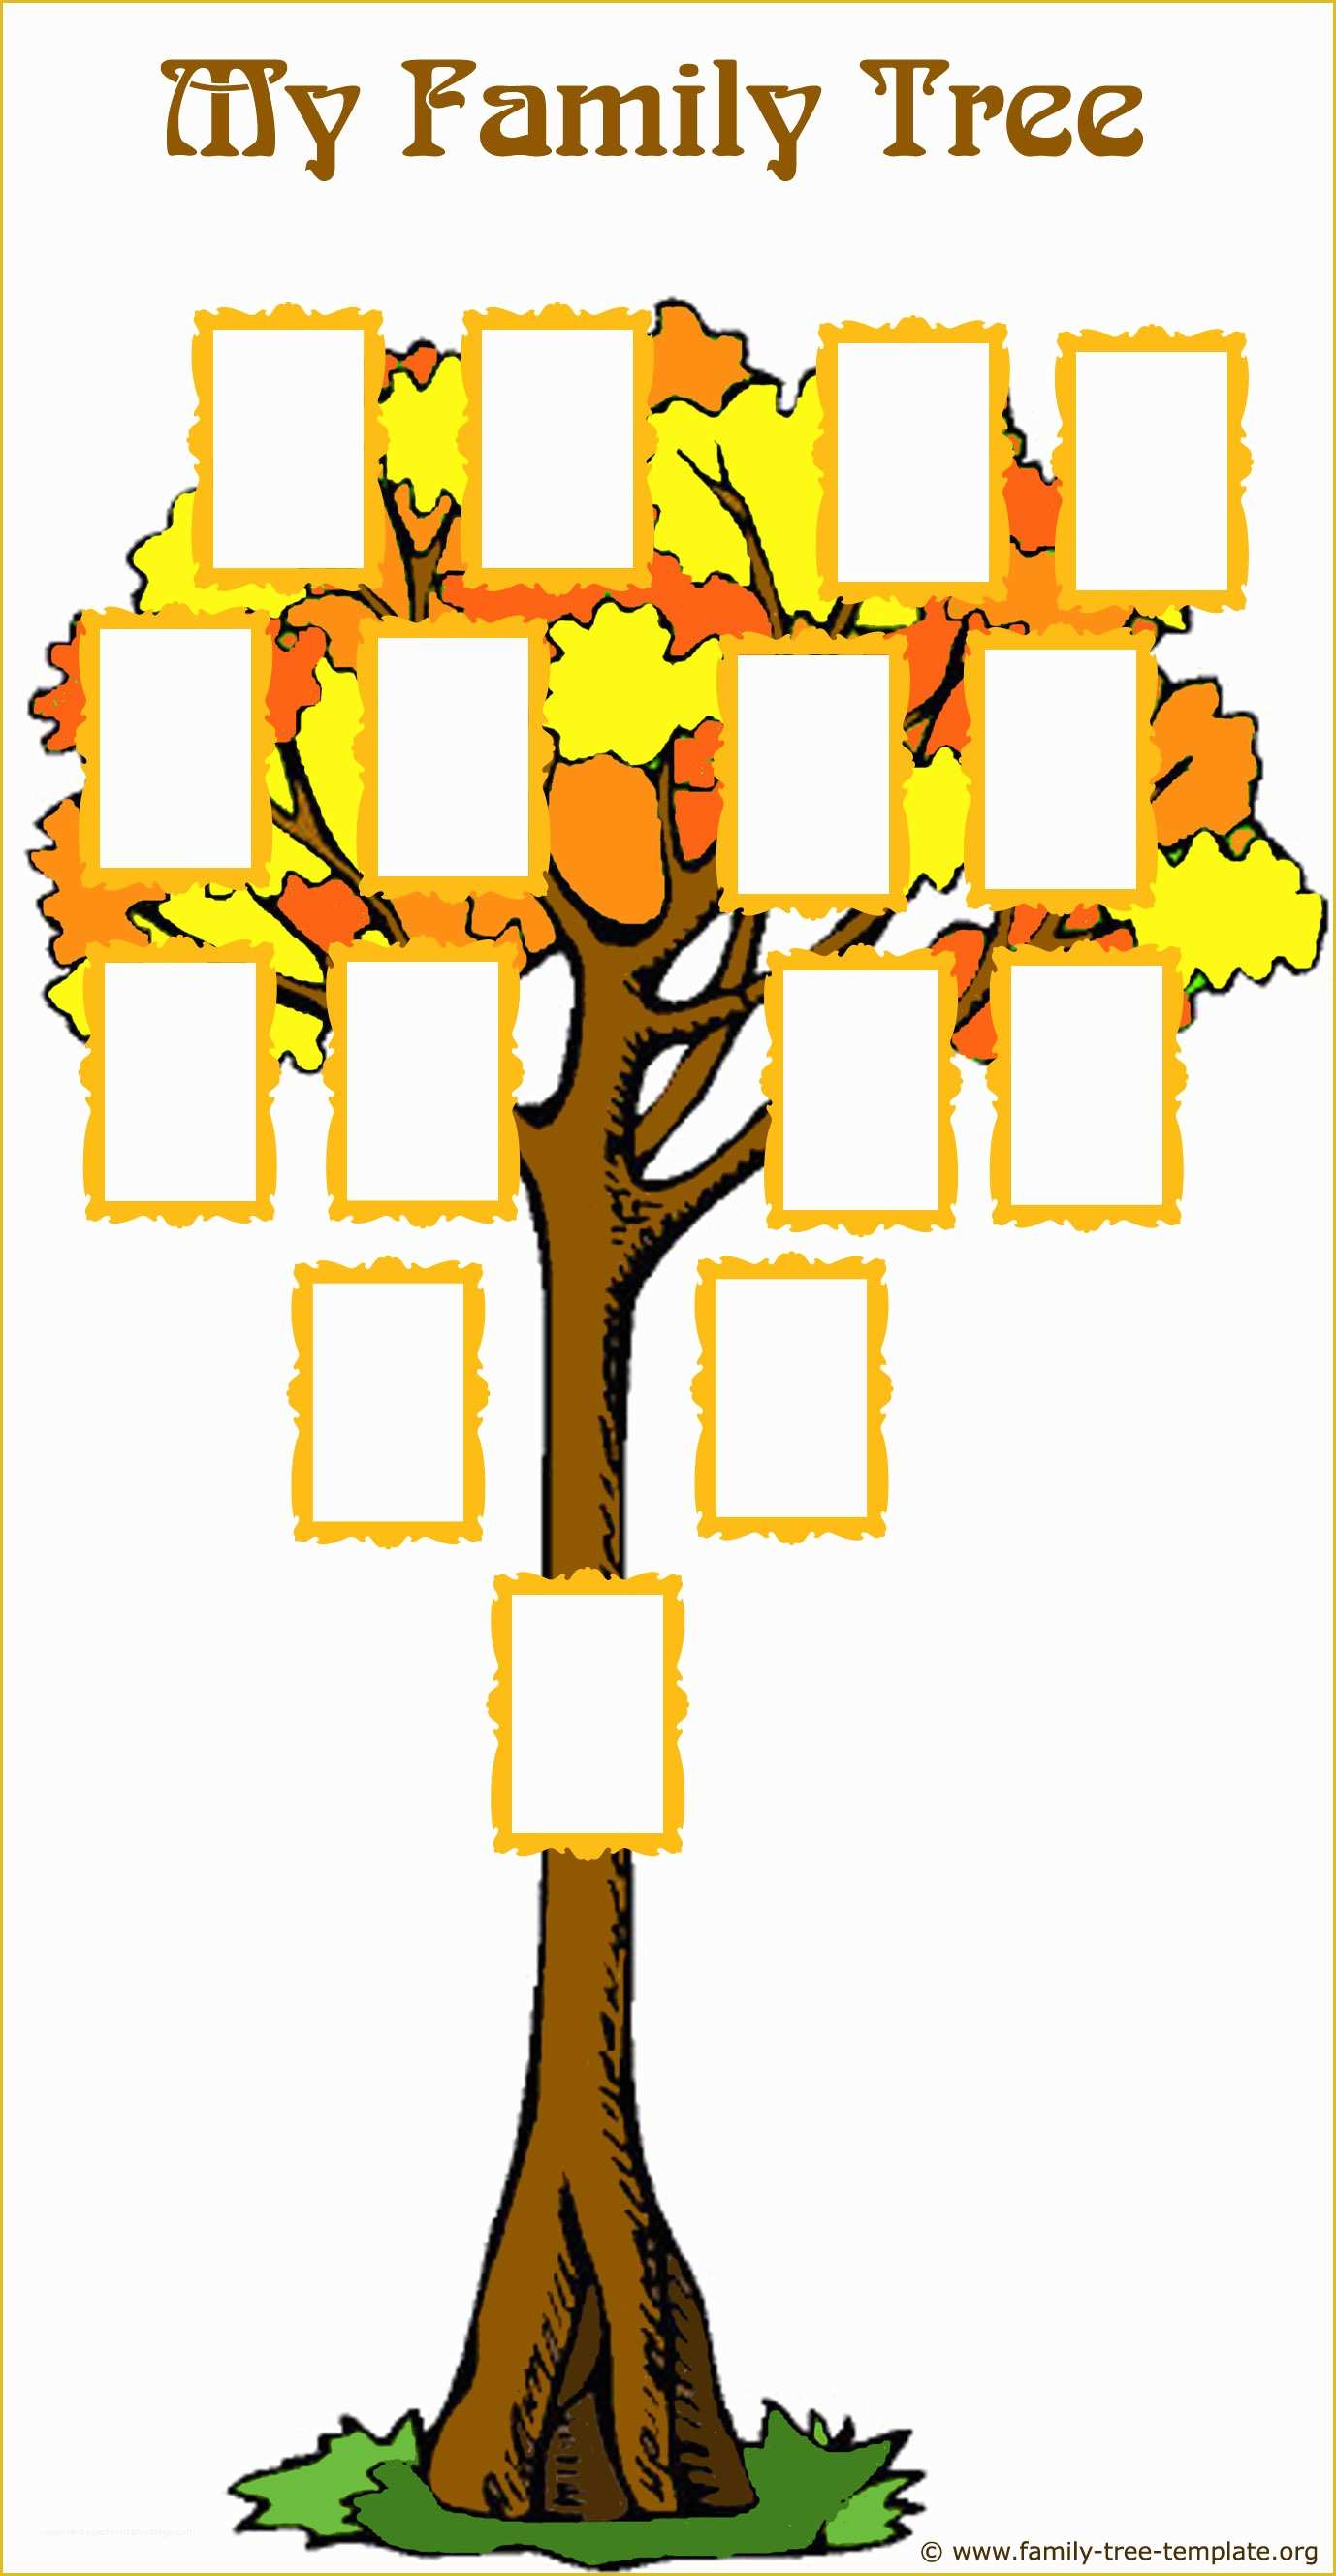 Free Family Tree Template Of Fabulous Family Tree forms and Easy Genealogy Methods